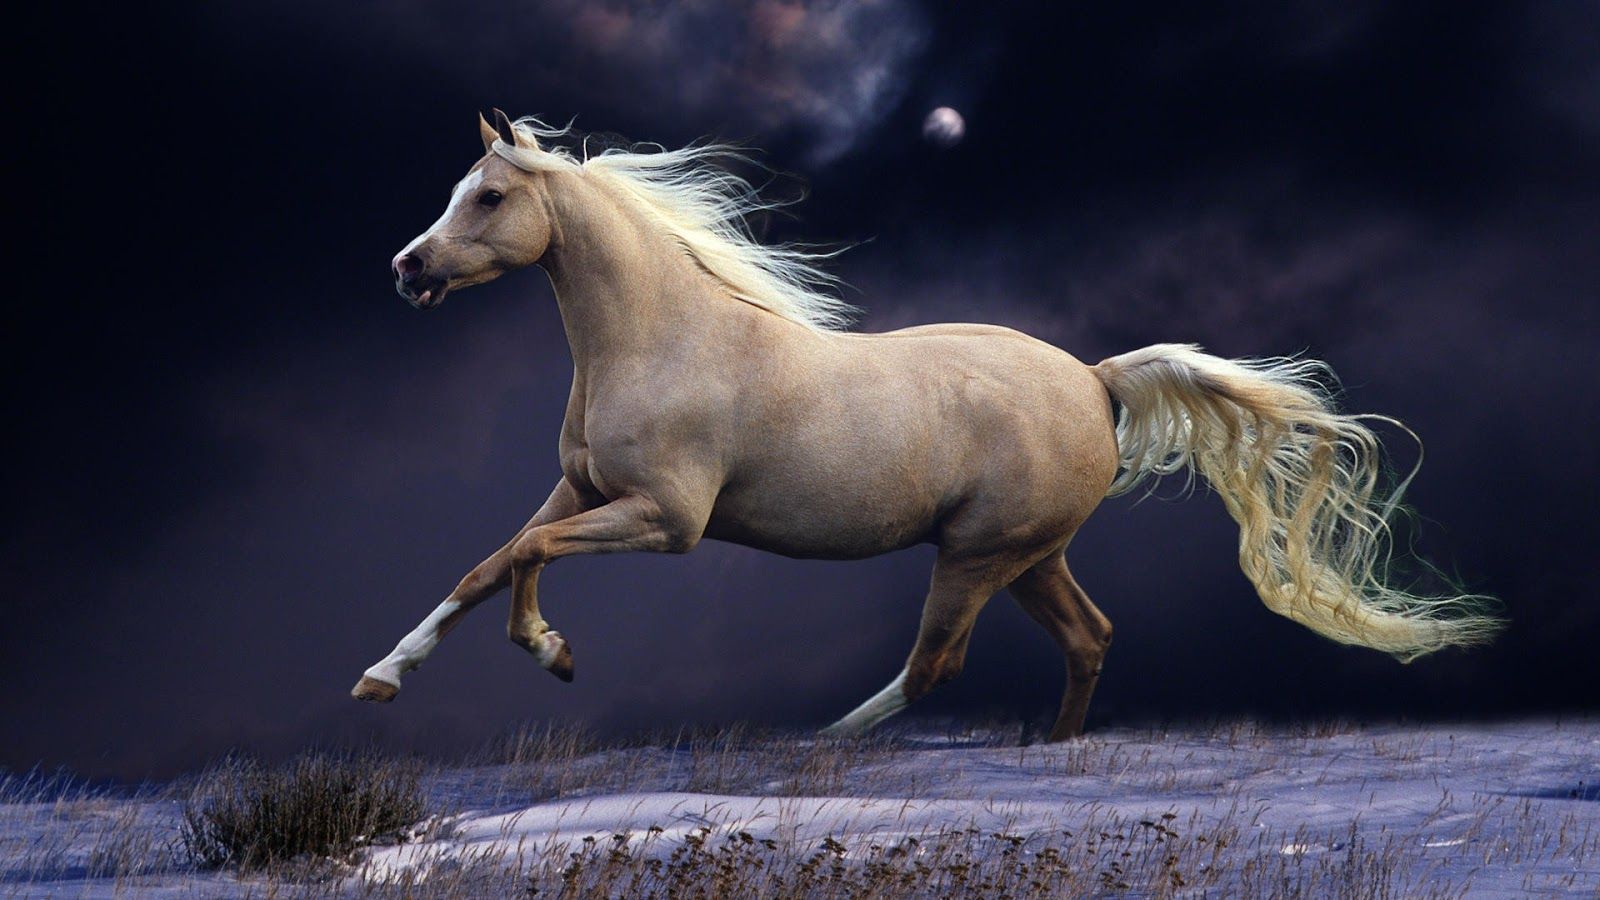 Background Horse Wallpaper Discover more Aesthetic, Cute, Domesticated,  Hoofed, Horse wallpaper. https://www.enwallpaper.com… | Horse wallpaper,  Horses, Free horses